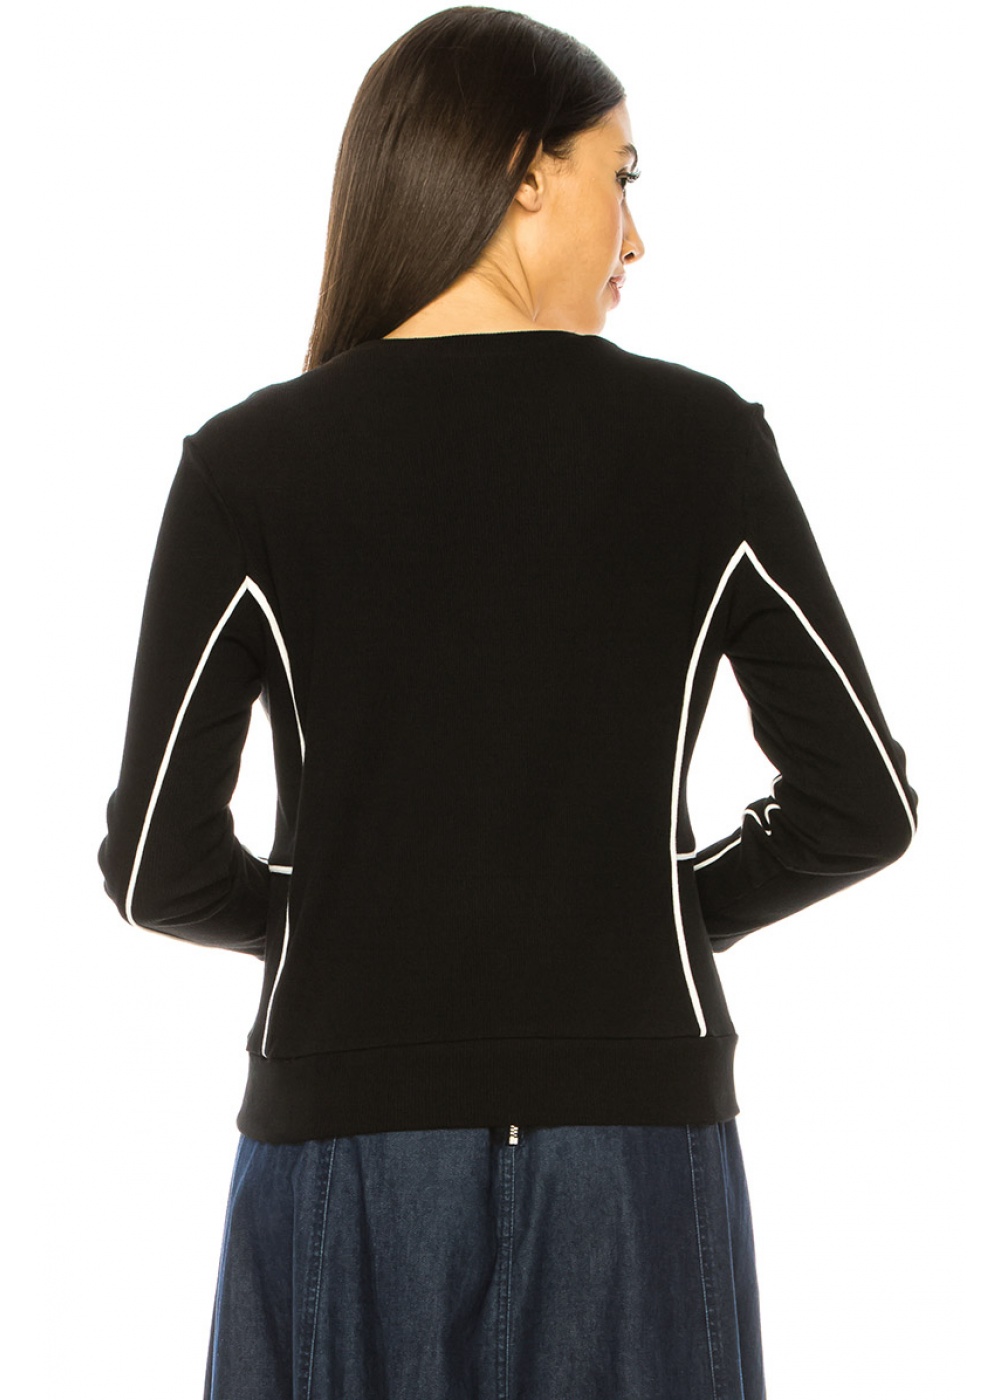 Black Long Sleeve T-Shirt With Stripes